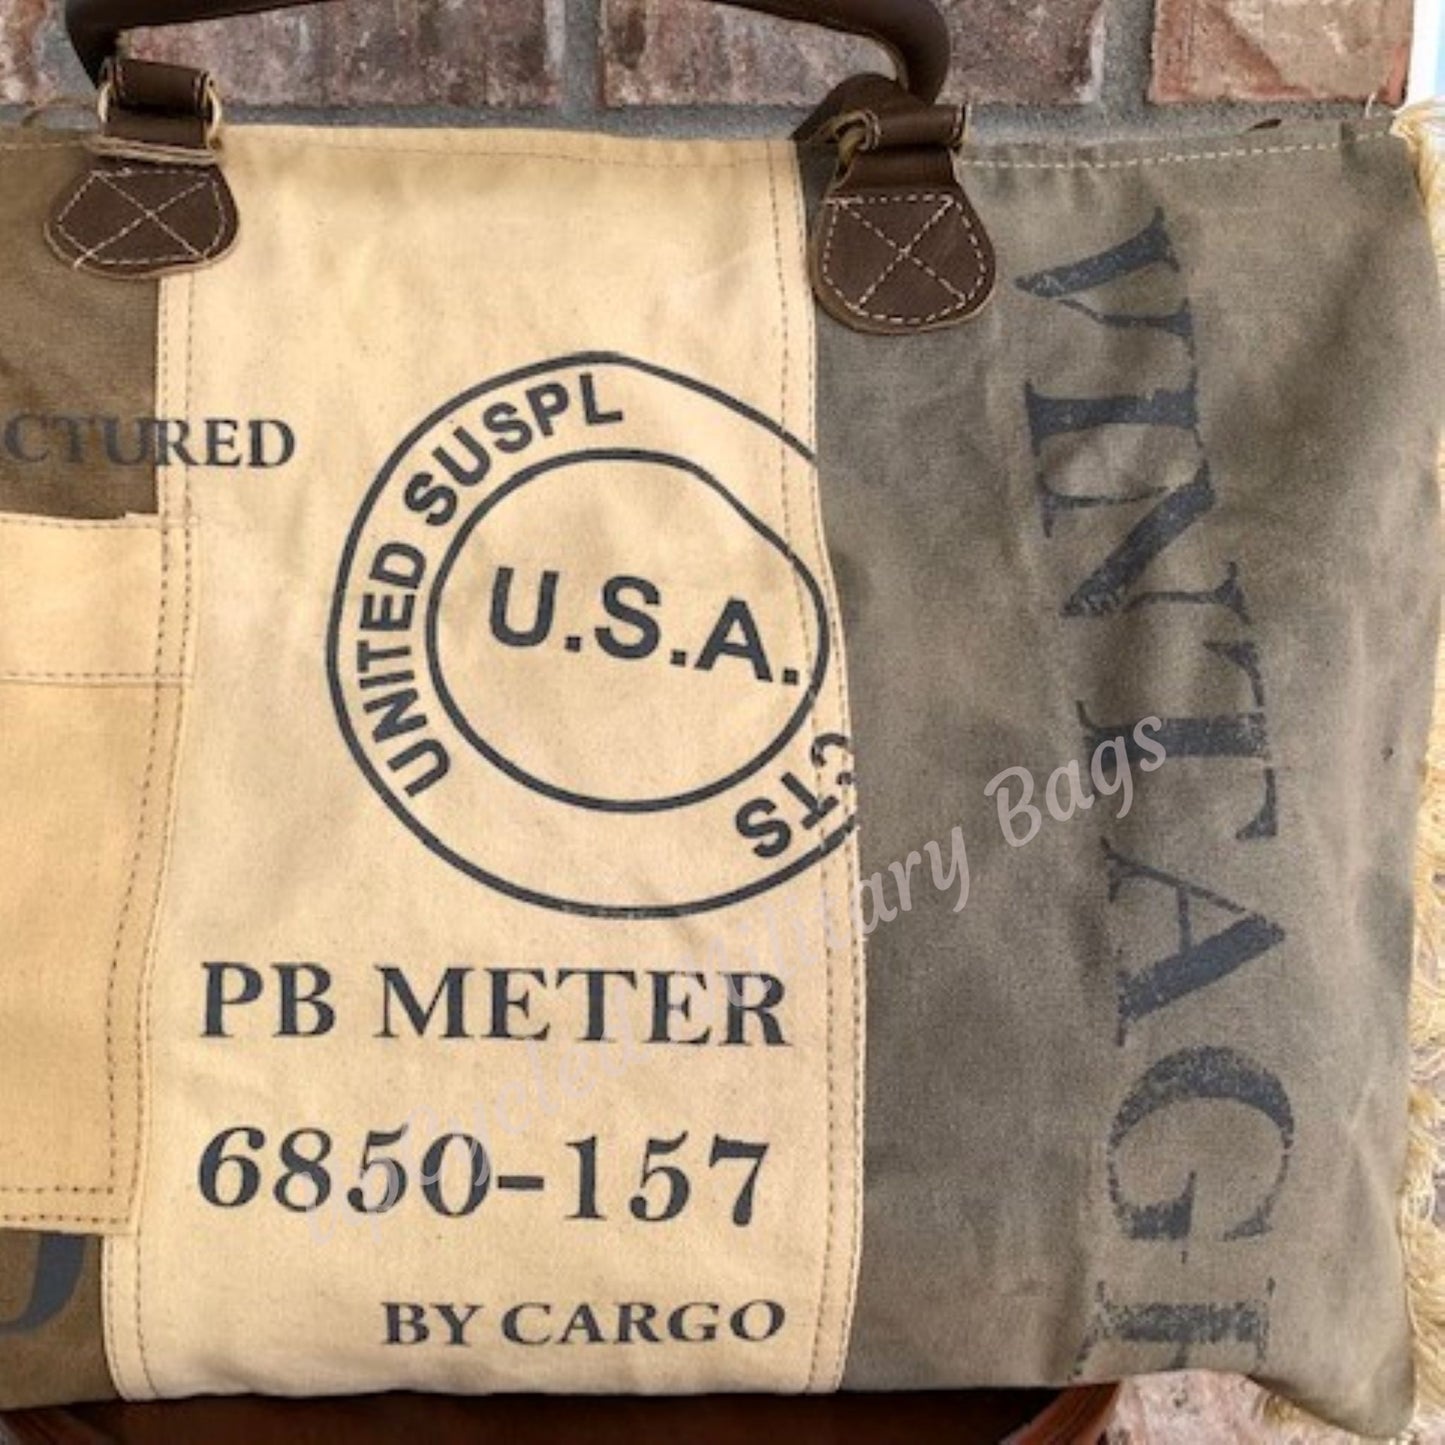 USA Weekender/Tote-Made of Repurposed Military Canvas-FREE SHIPPING –  Recycled Military Bags